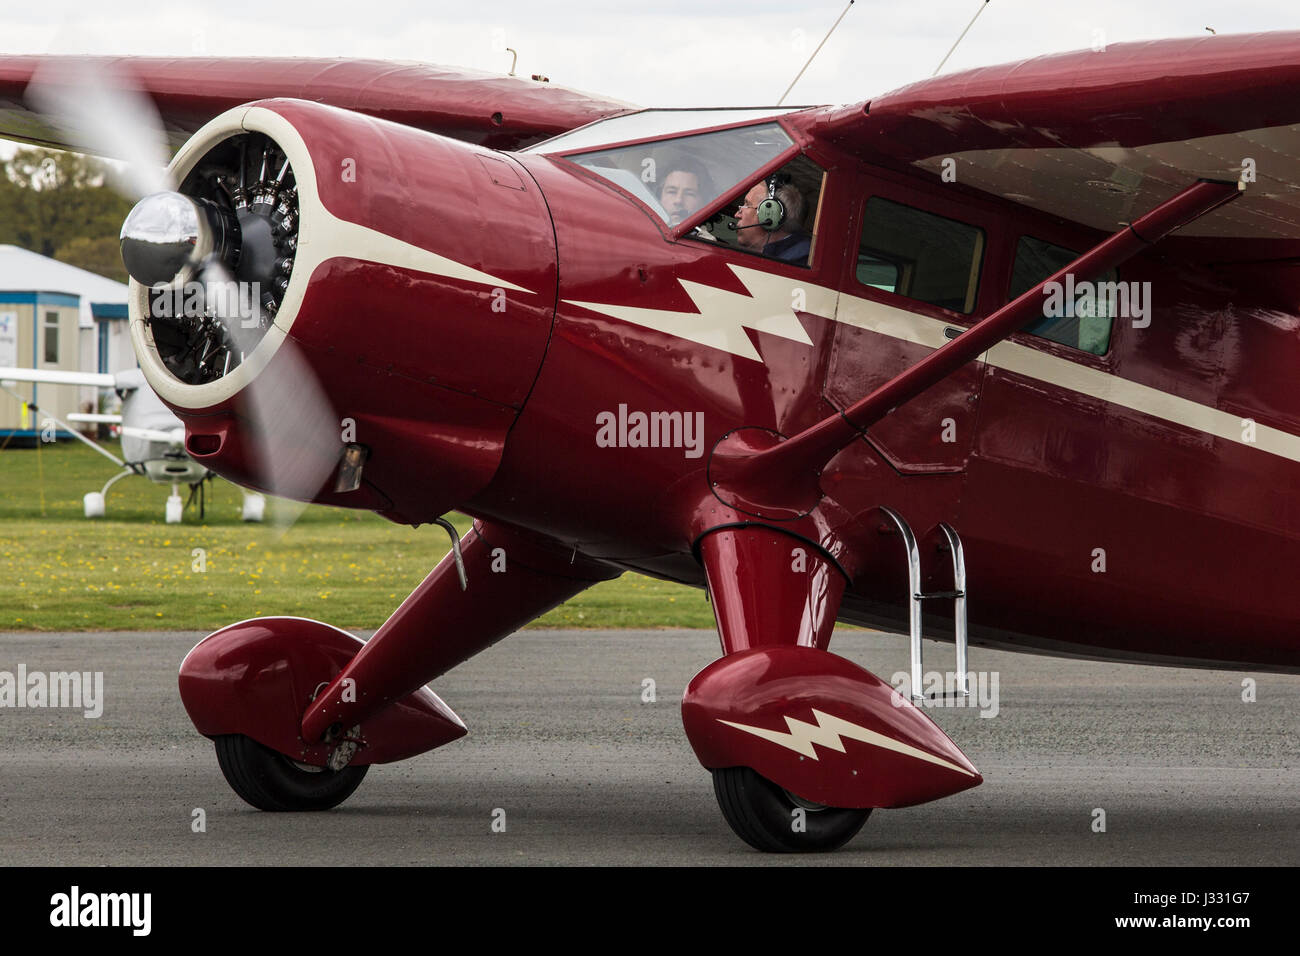 Stinson V-77 Reliant vintage aeroplane. Built in 1944 and registered NC33543. Stock Photo